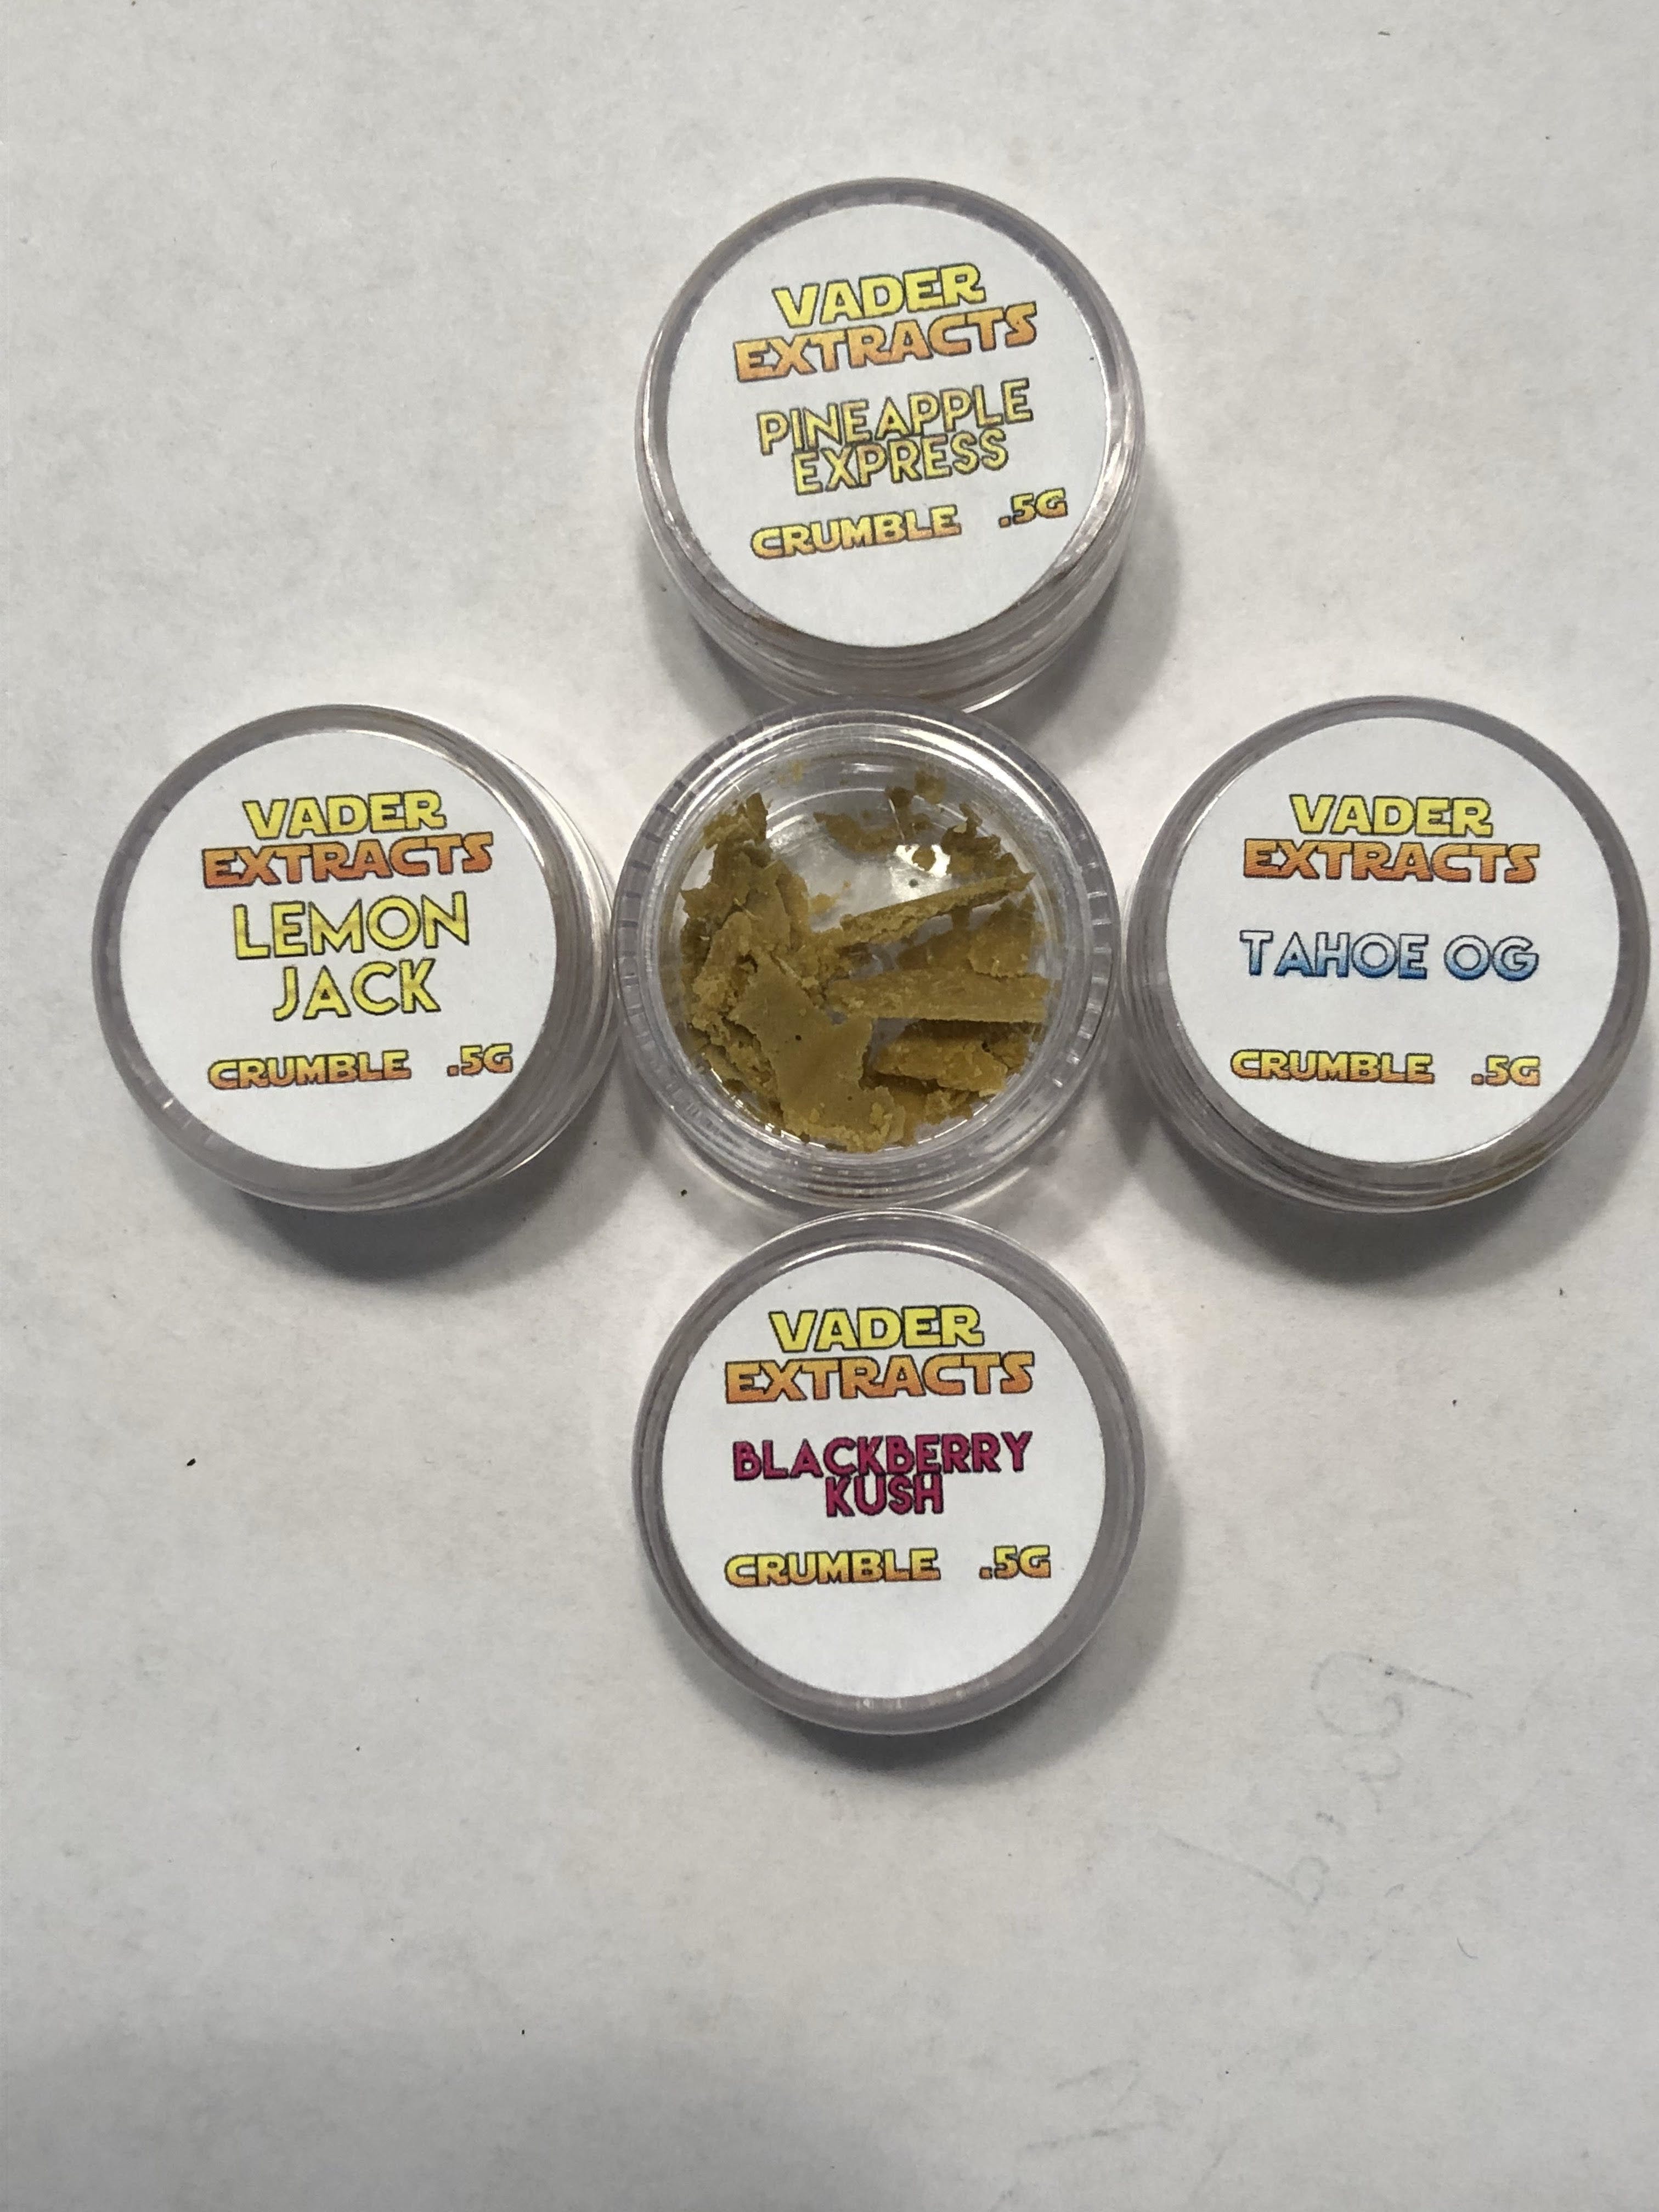 Vader Extracts trim run crumble